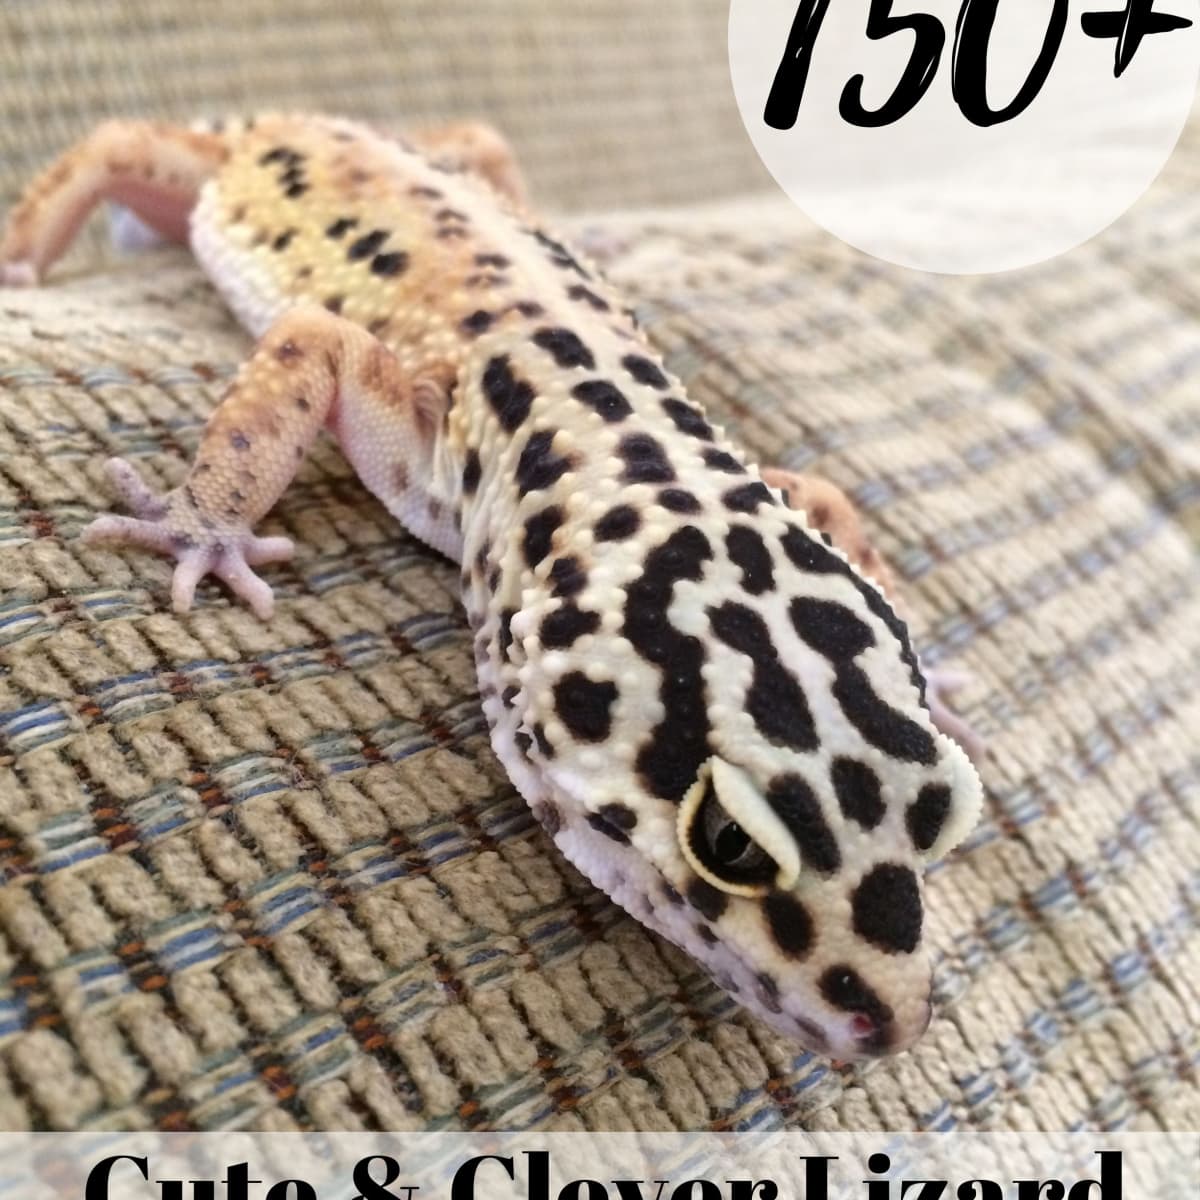 150+ Cute and Funny Names for Your Pet Lizard - PetHelpful